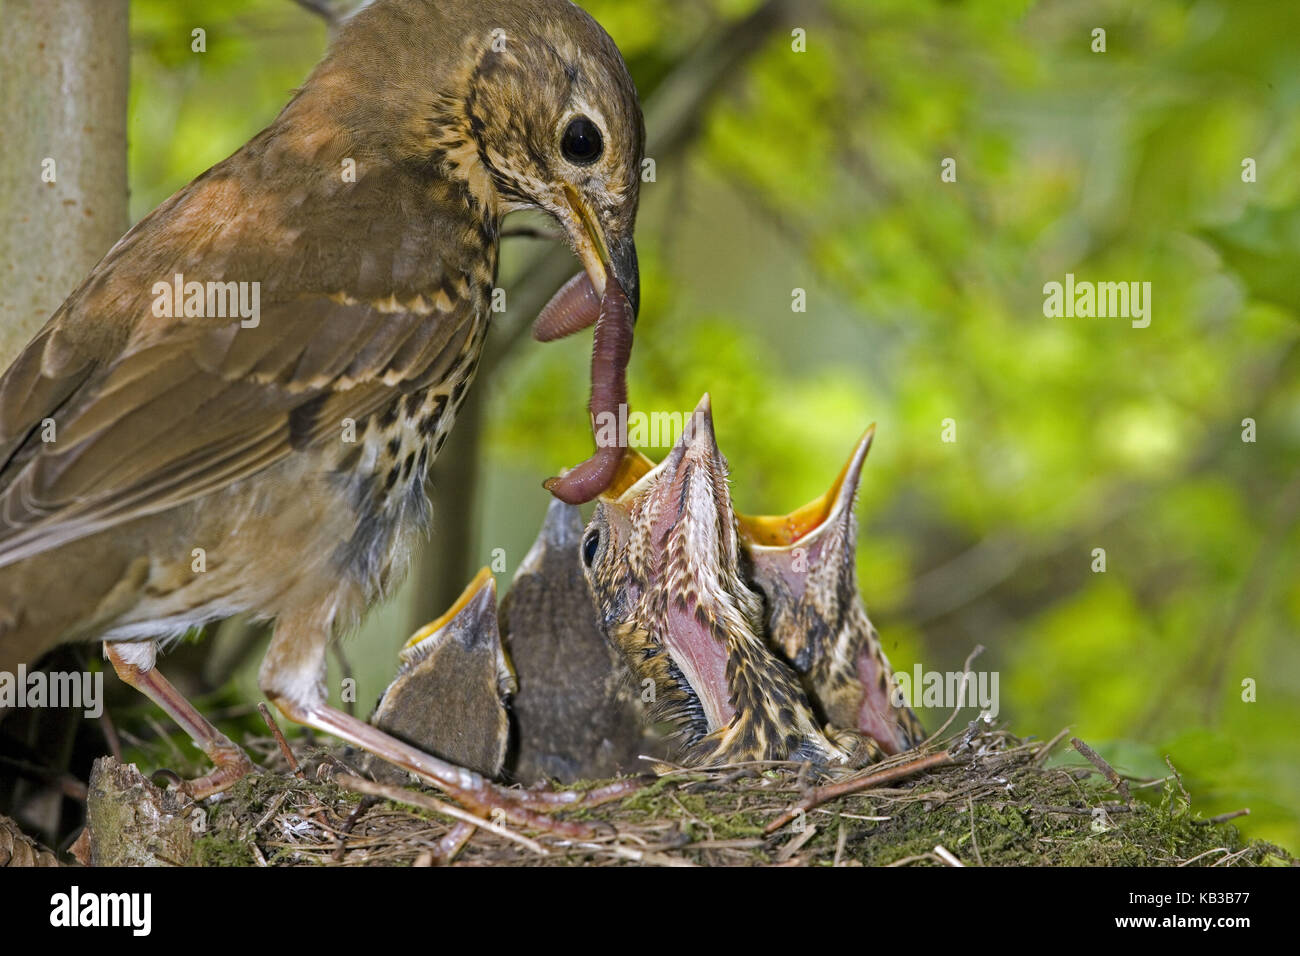 Song throttle, Turdus philomelos, adult animal Bird feeds young animals in the nest, Stock Photo